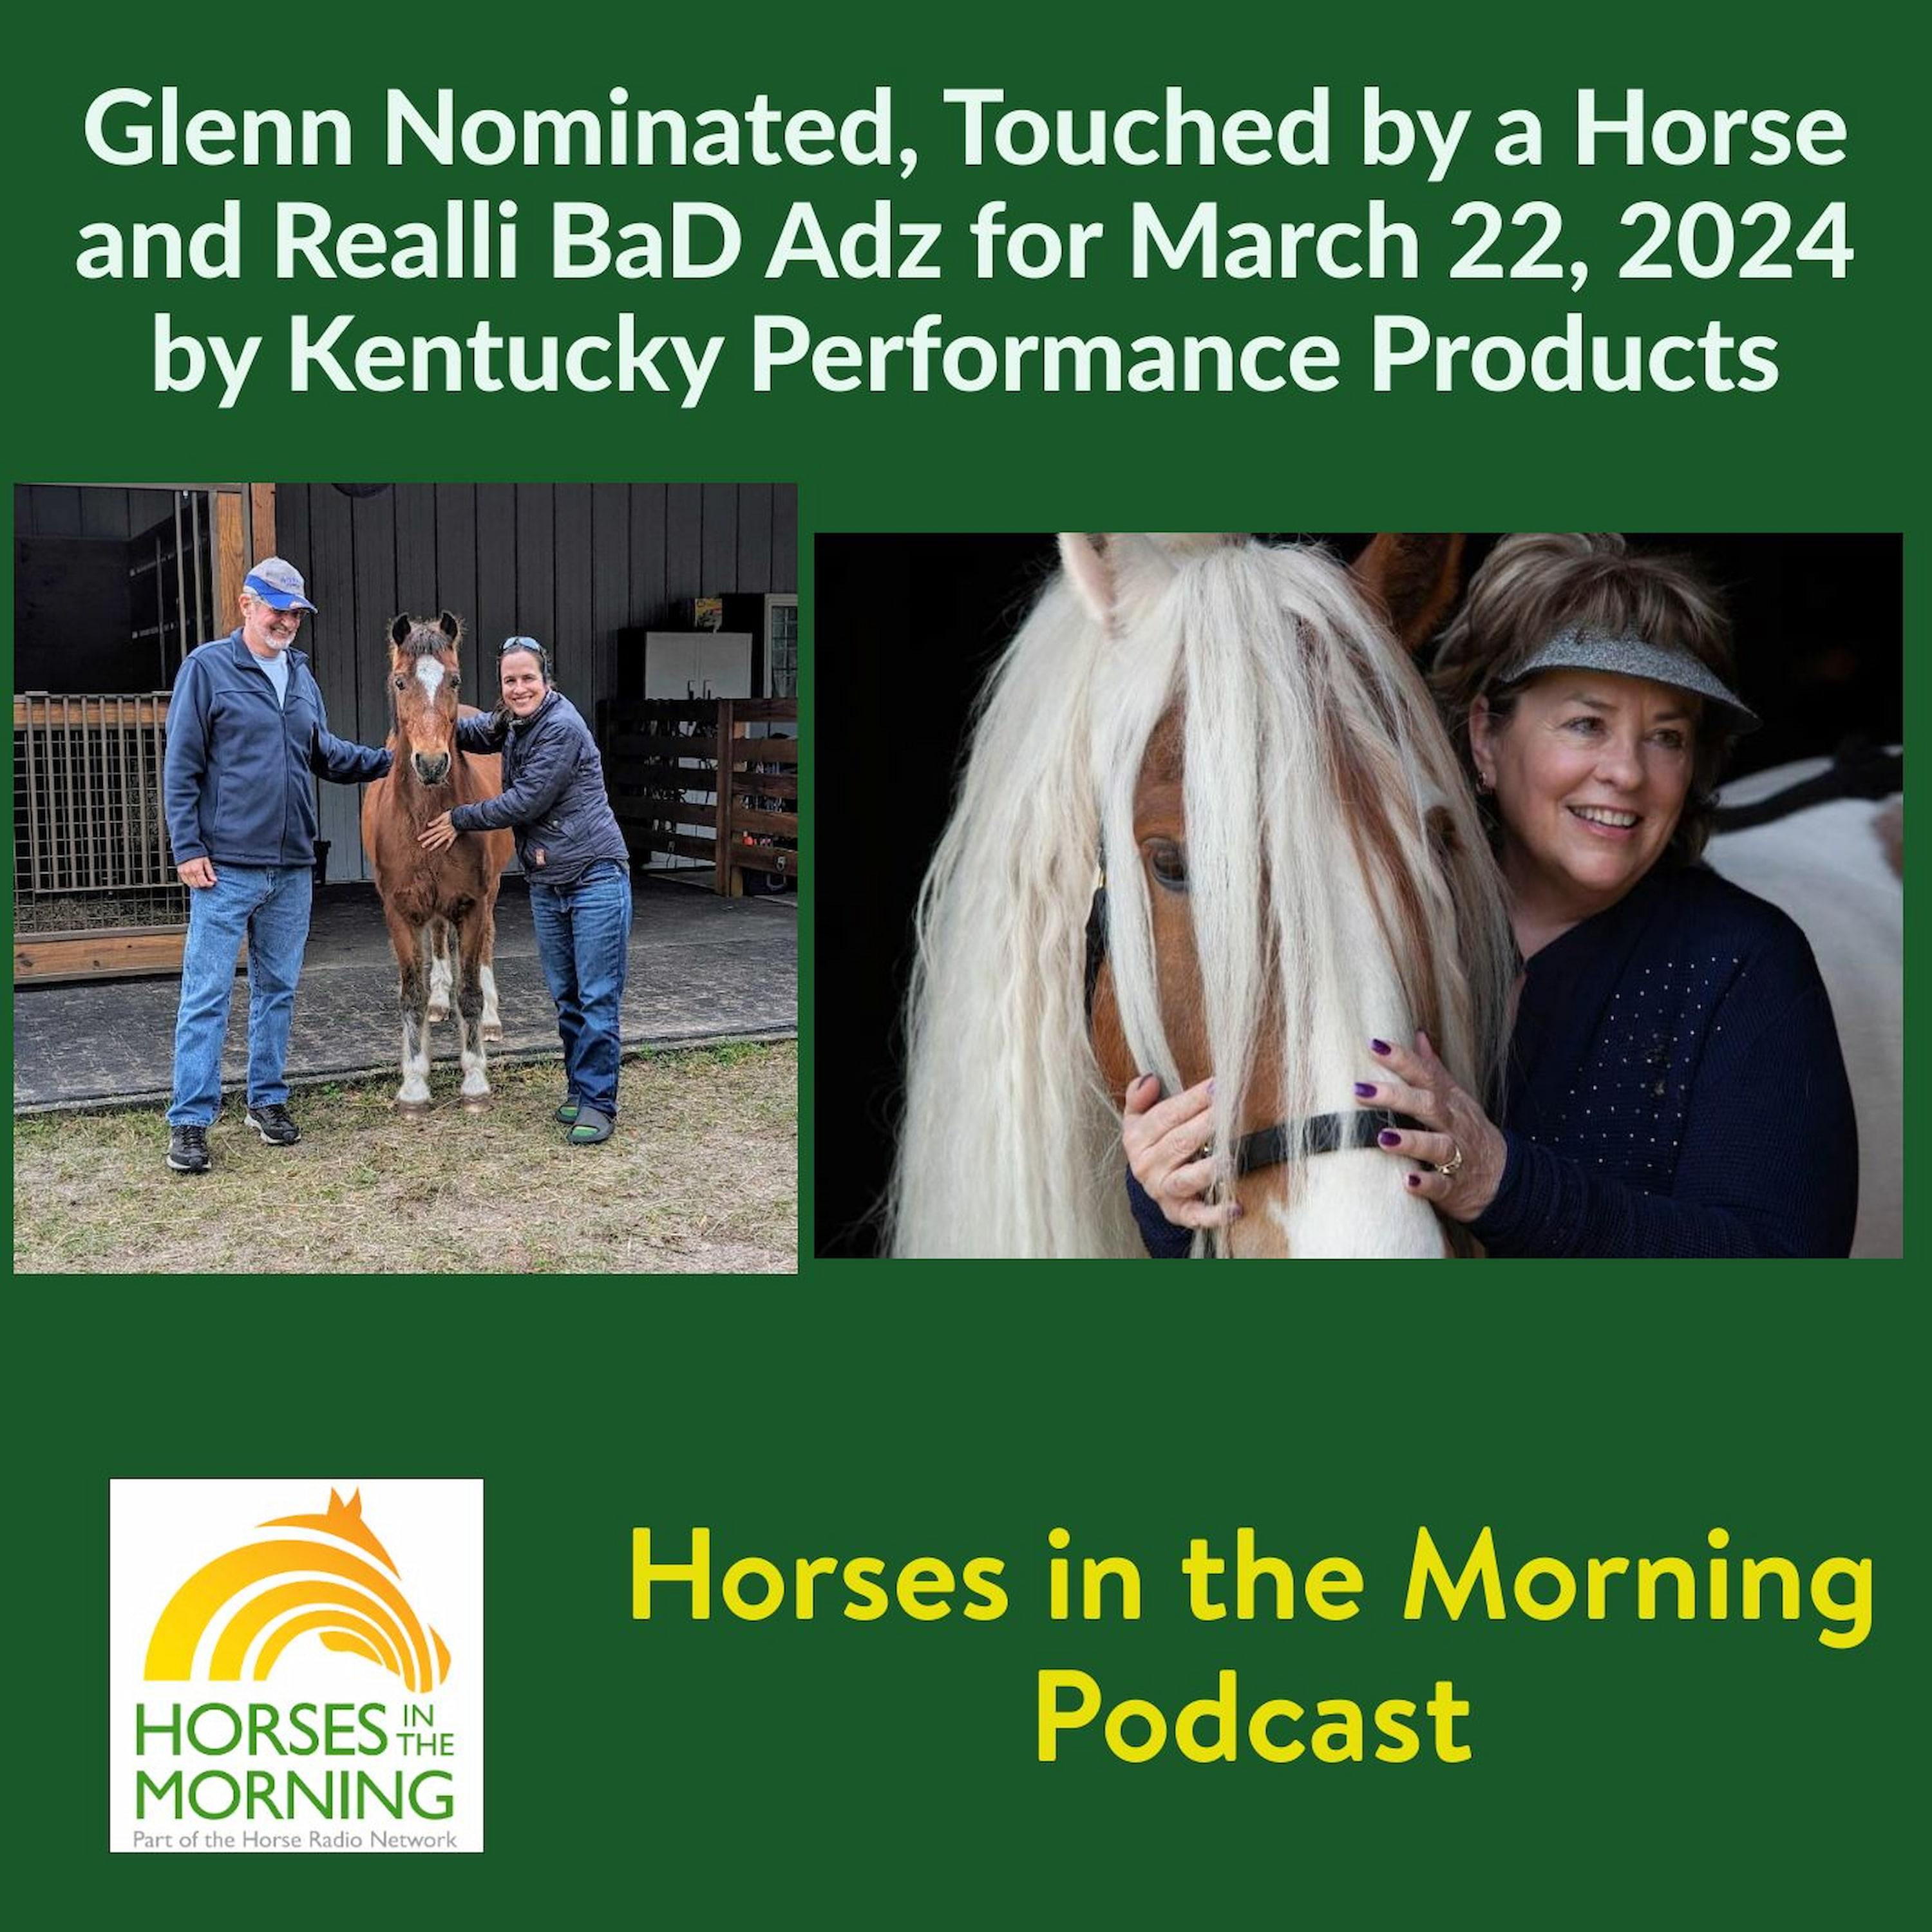 Glenn Nominated, Touched by a Horse and Realli BaD Adz for March 22, 2024 by Kentucky Performance Products - HORSES IN THE MORNING